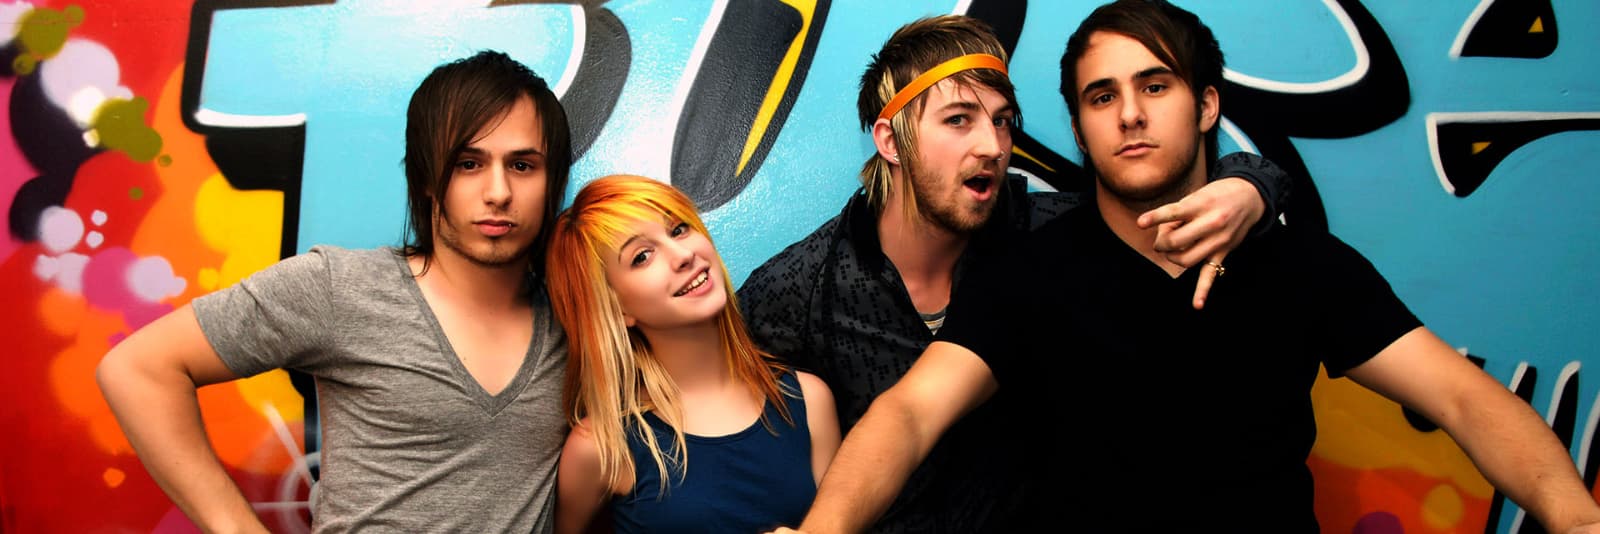 Paramore Store banner 1